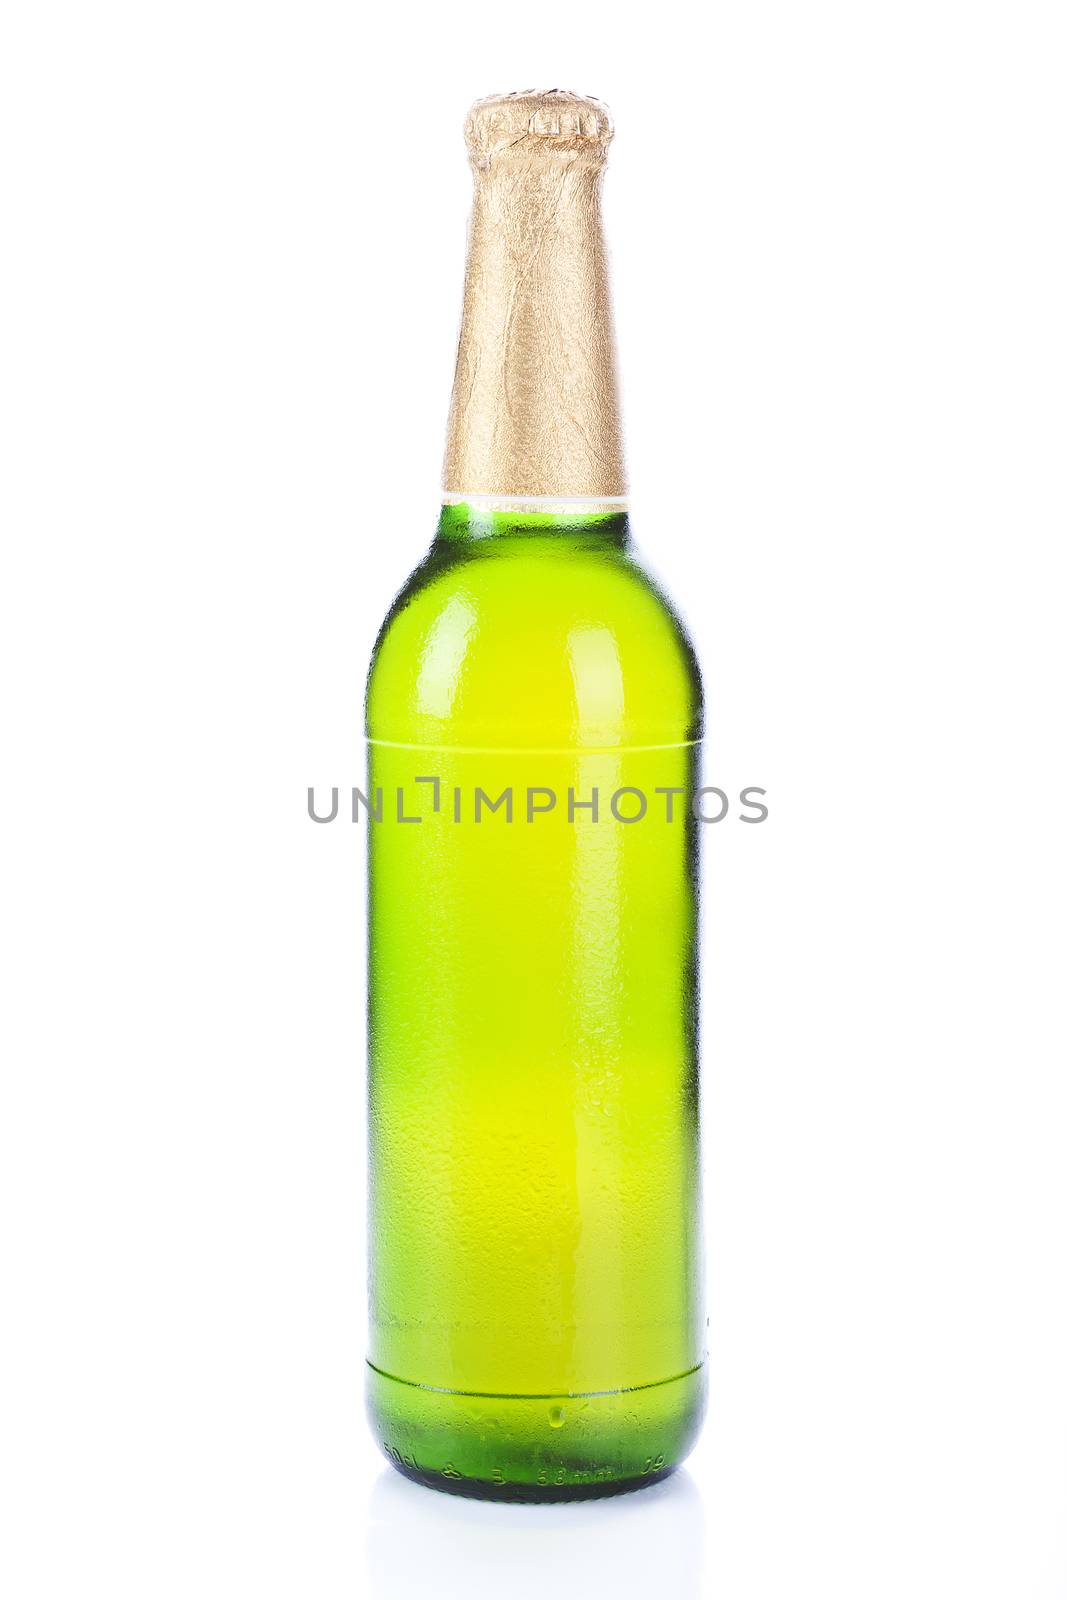 Luxurious cold green beer bottle without label isolated on white background. Cool summer concept.